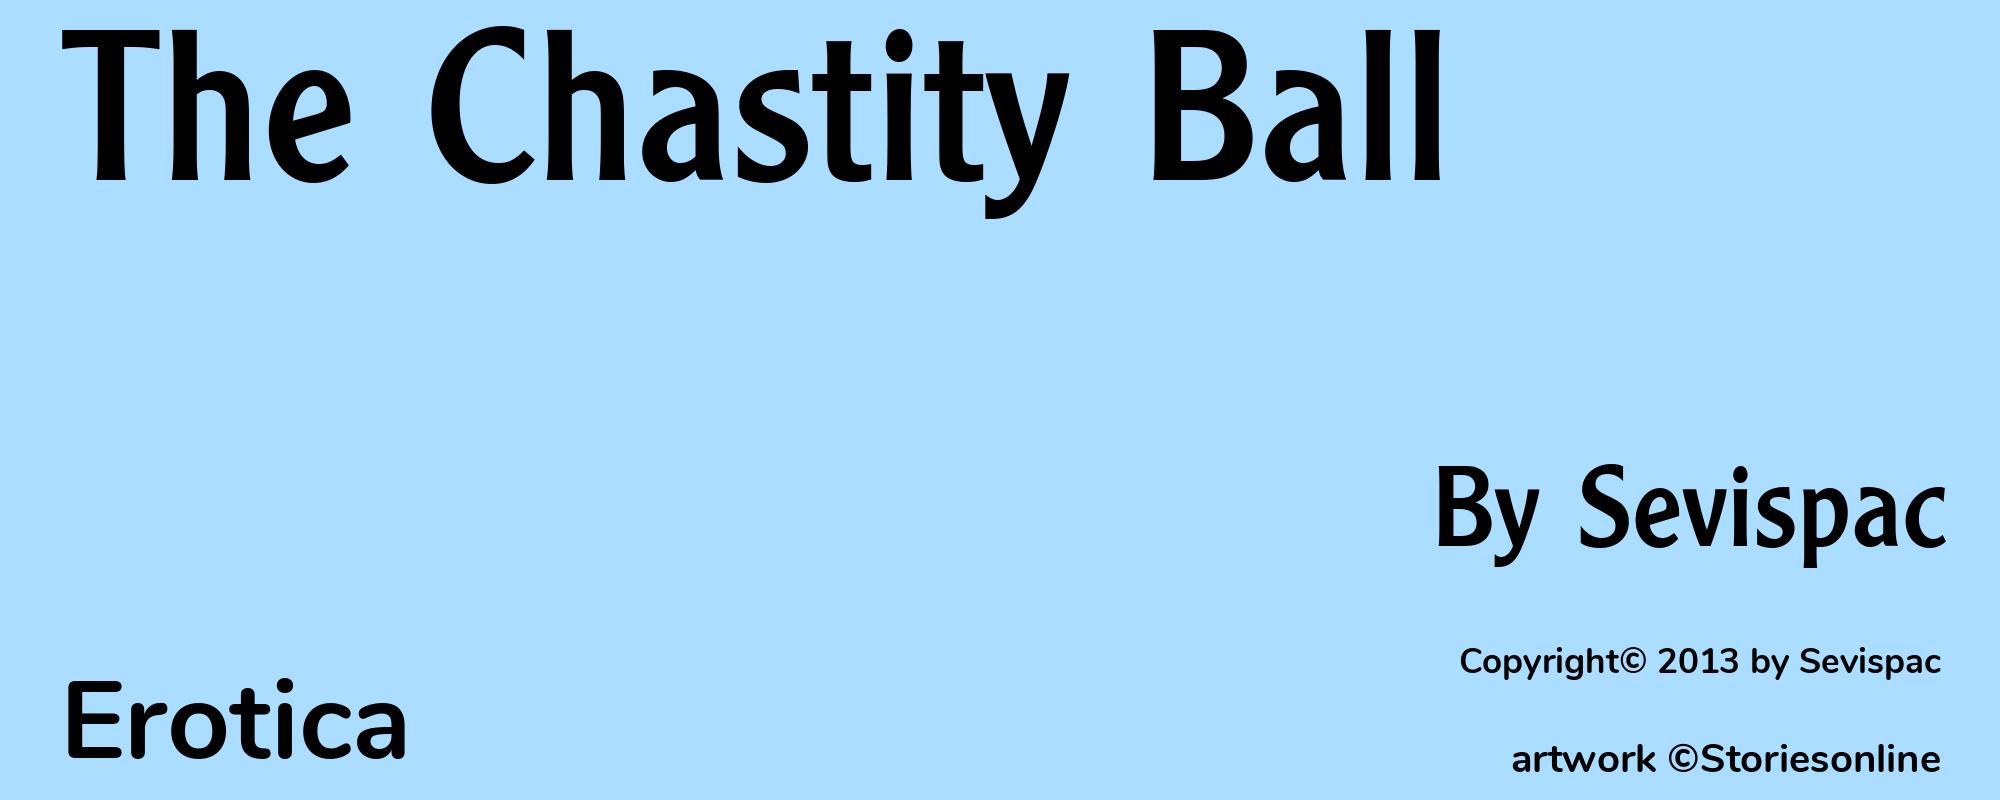 The Chastity Ball - Cover